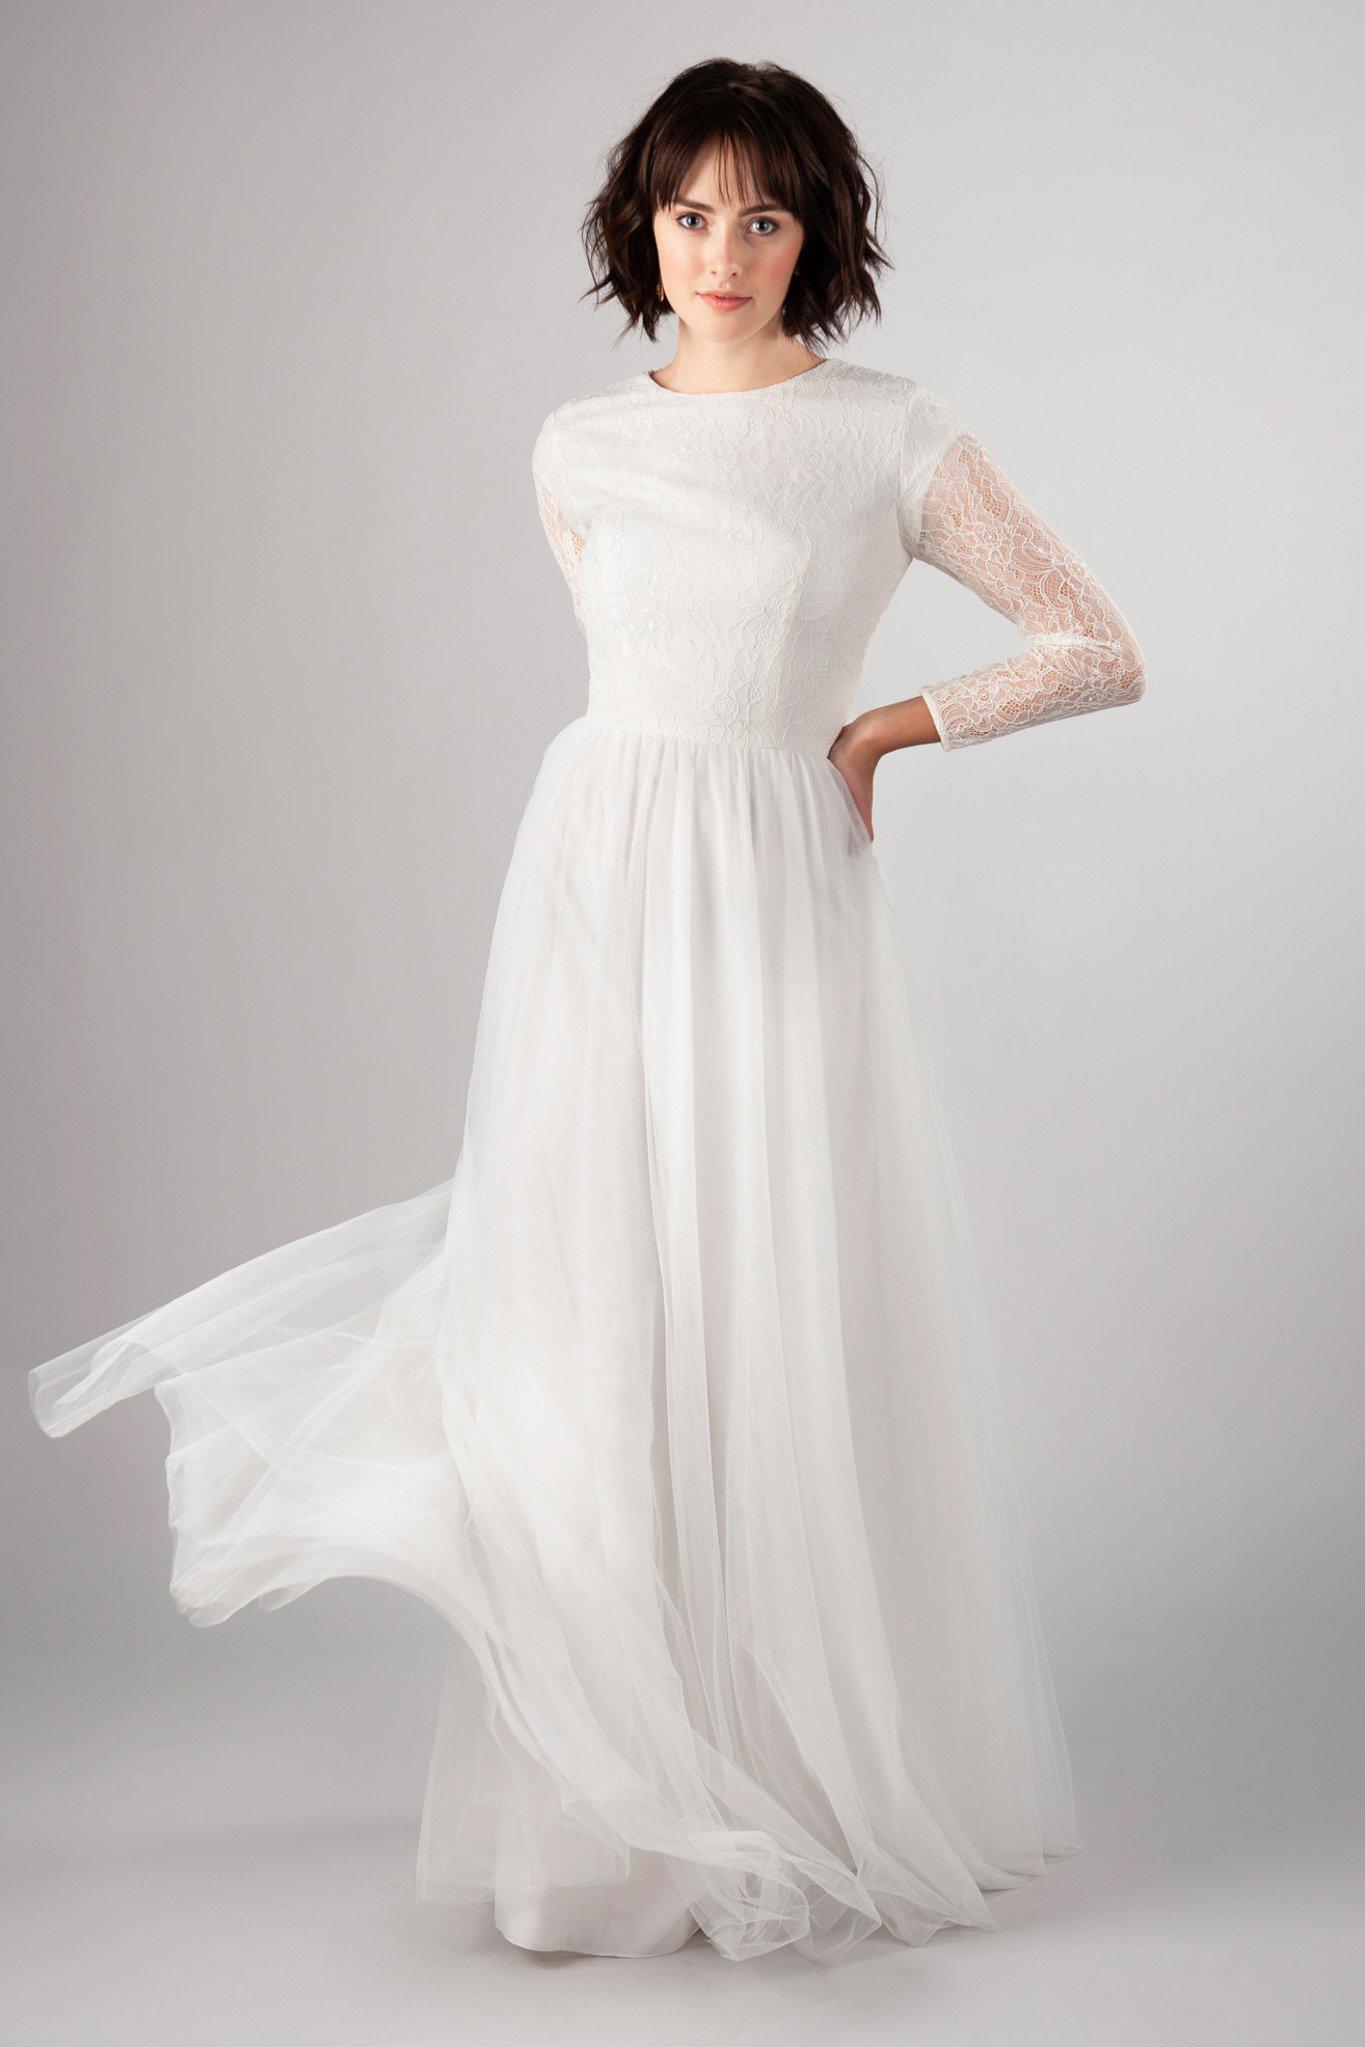 Light and flowy modest wedding gown, style Wisteria, is part of the Wedding Collection of LatterDayBride, a Utah Wedding Shop. 